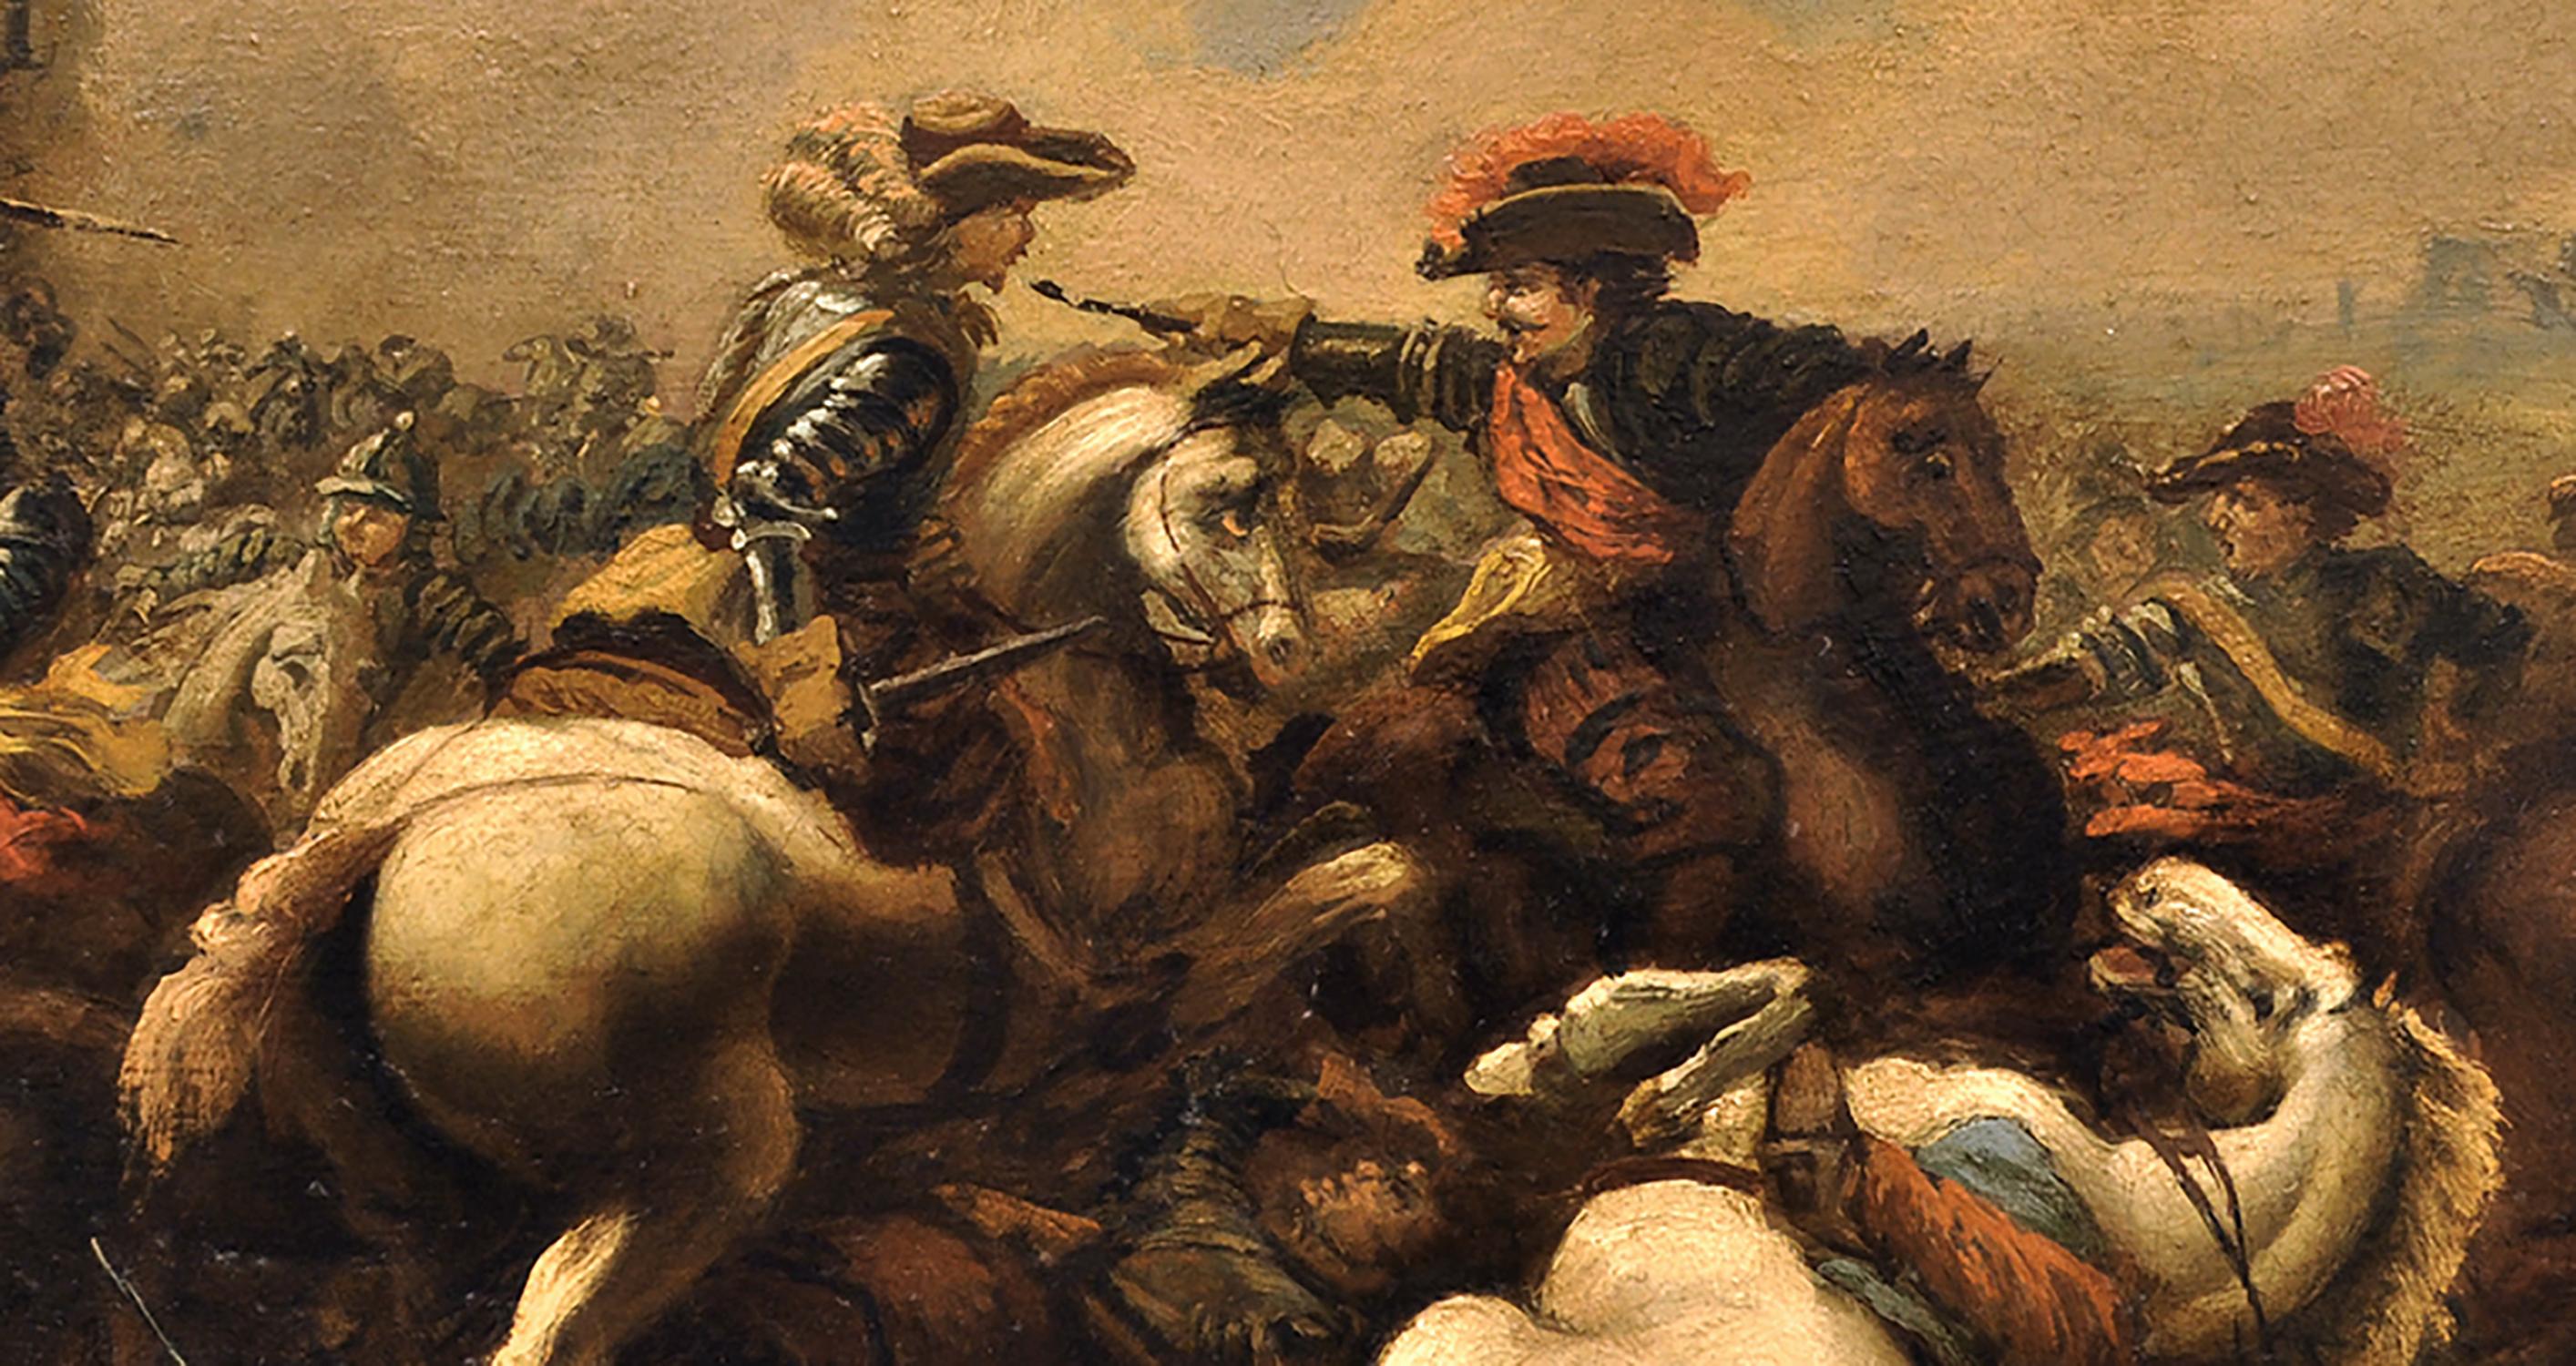 Land battle - Salvatore Alfano Italia 2006 - Oil on canvas cm.40x60


Maestro Salvatore Alfano drew inspiration from the masterpieces of the great Neapolitan Maestro Salvator Rosa who was the author of great war and cavalry scenes, so much so that